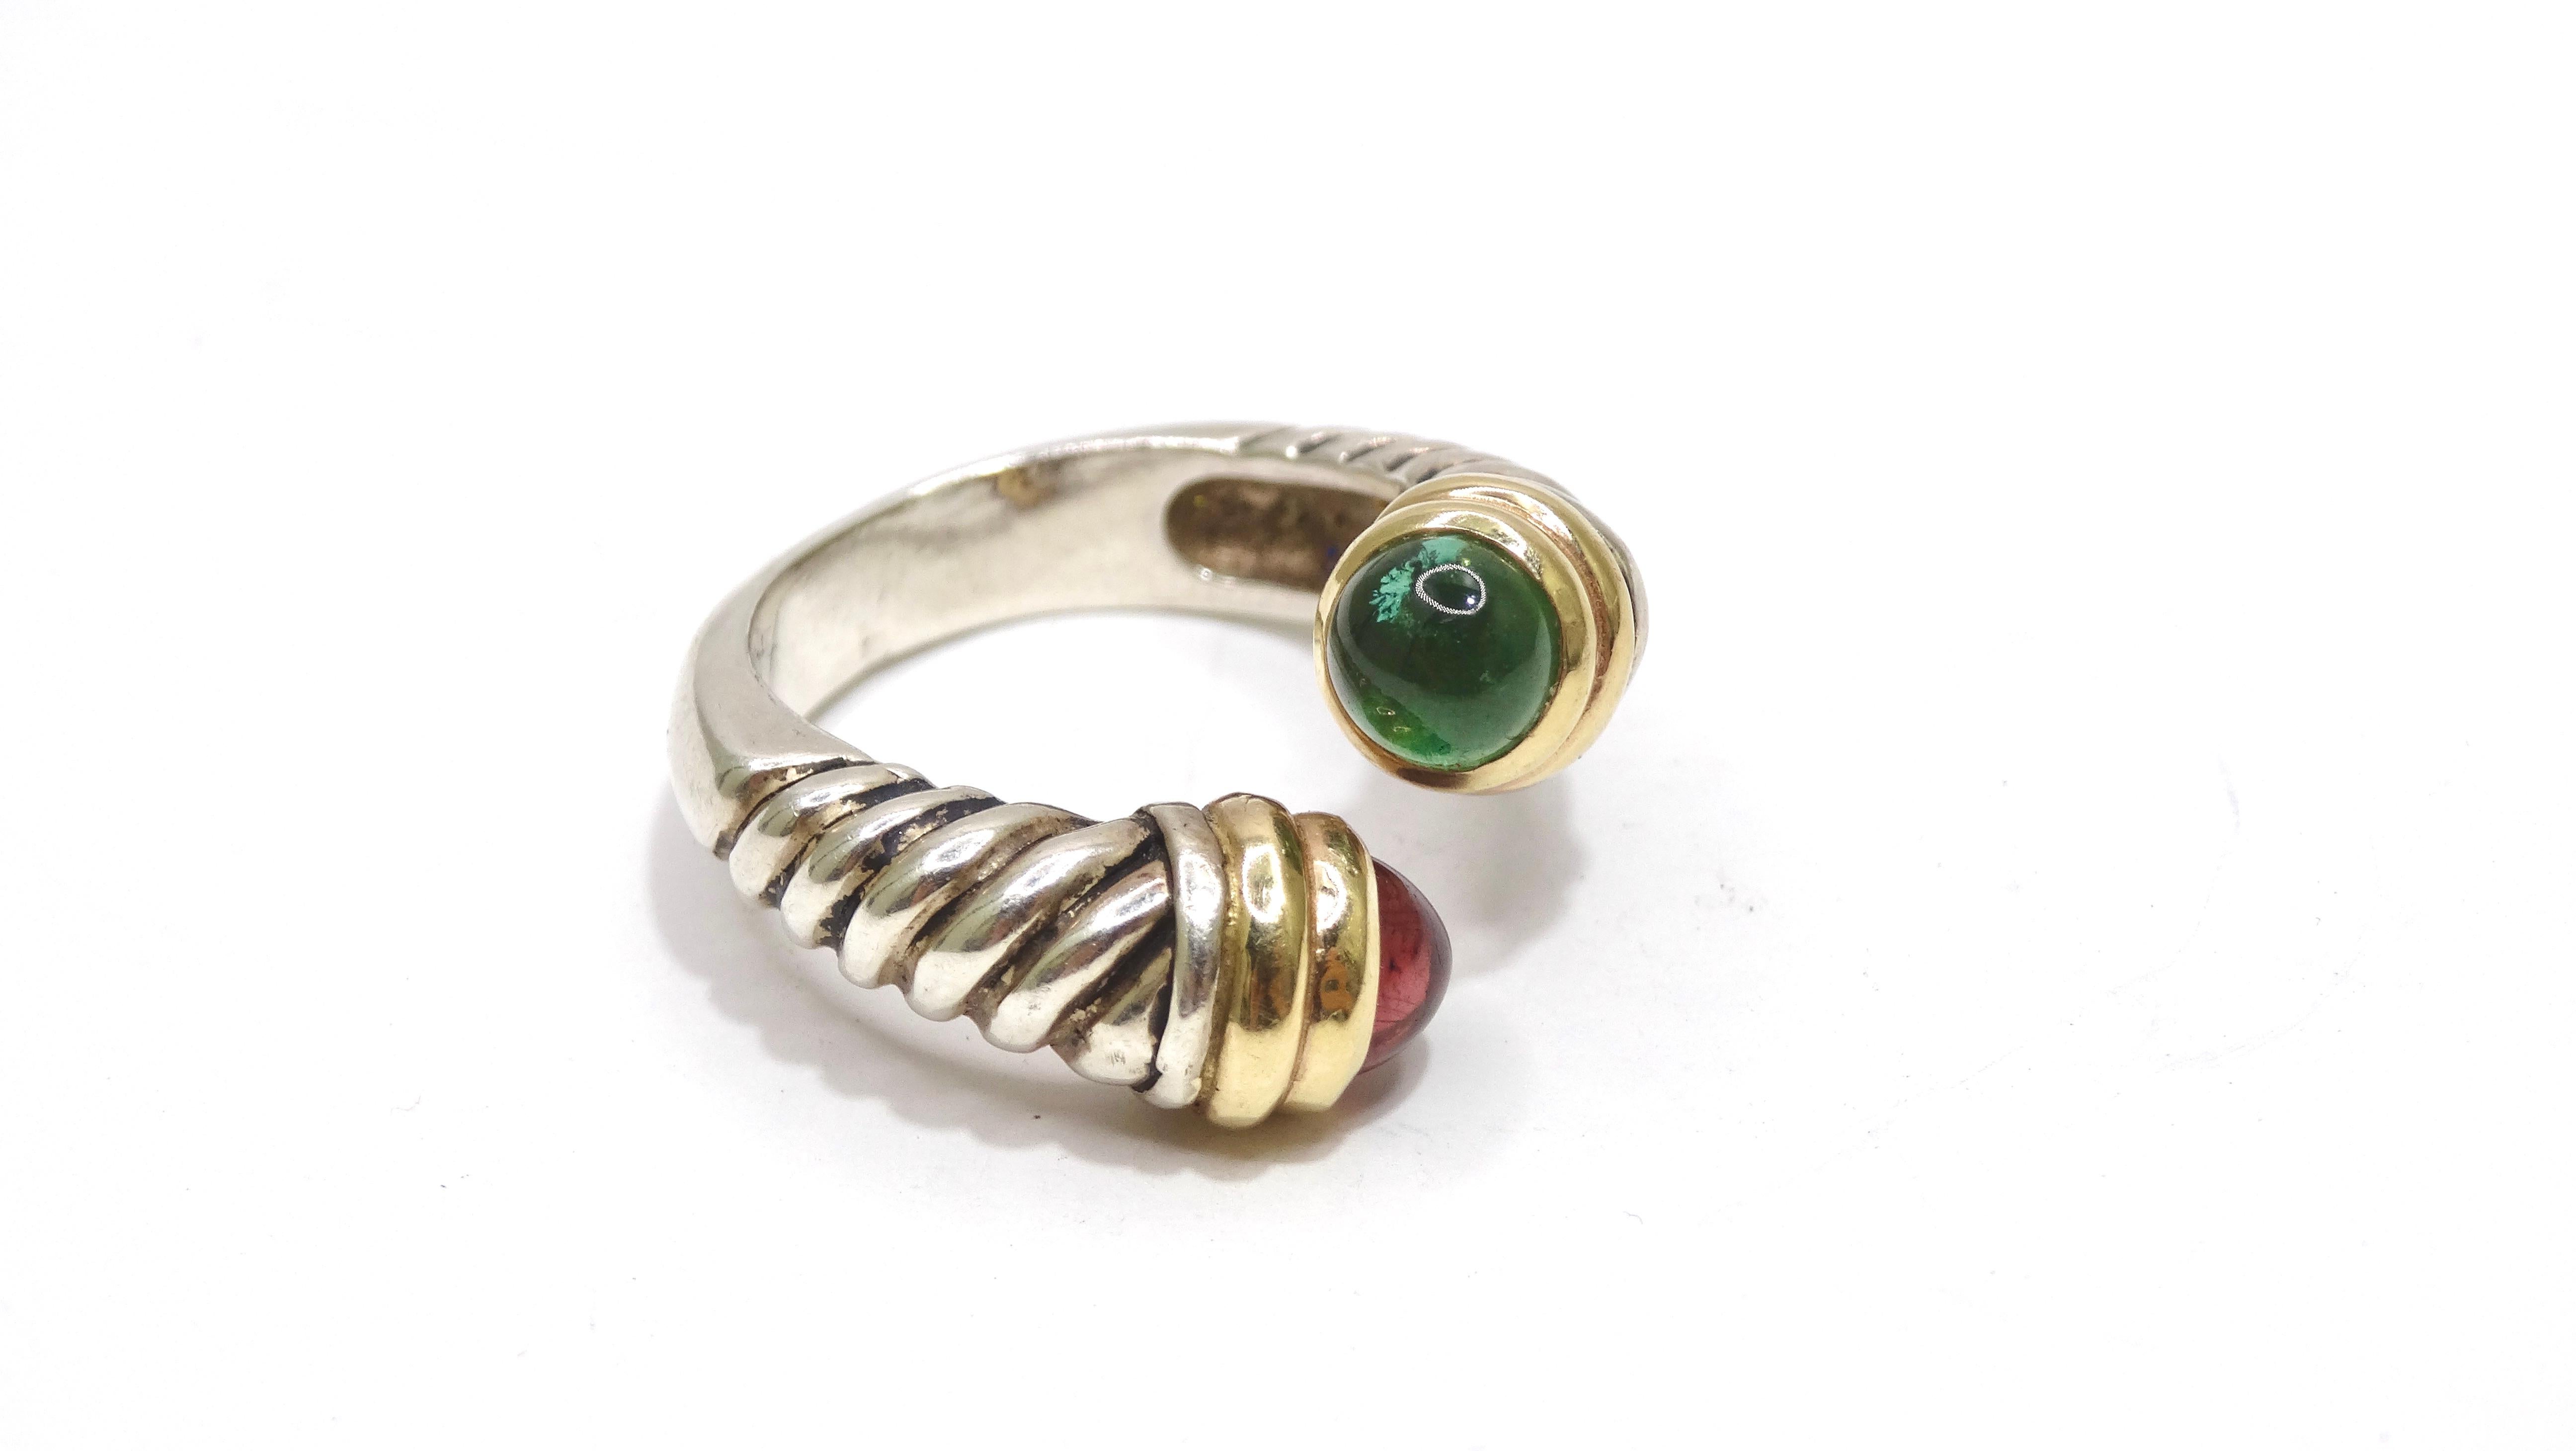 Calling David Yurman collectors! This beautifully designed ring may just be your next favorite. Featuring a pink and green Tourmaline, silver, and 18k gold. Has a wrapped shape that will add an interesting twist to your jewelry layering. Layer this